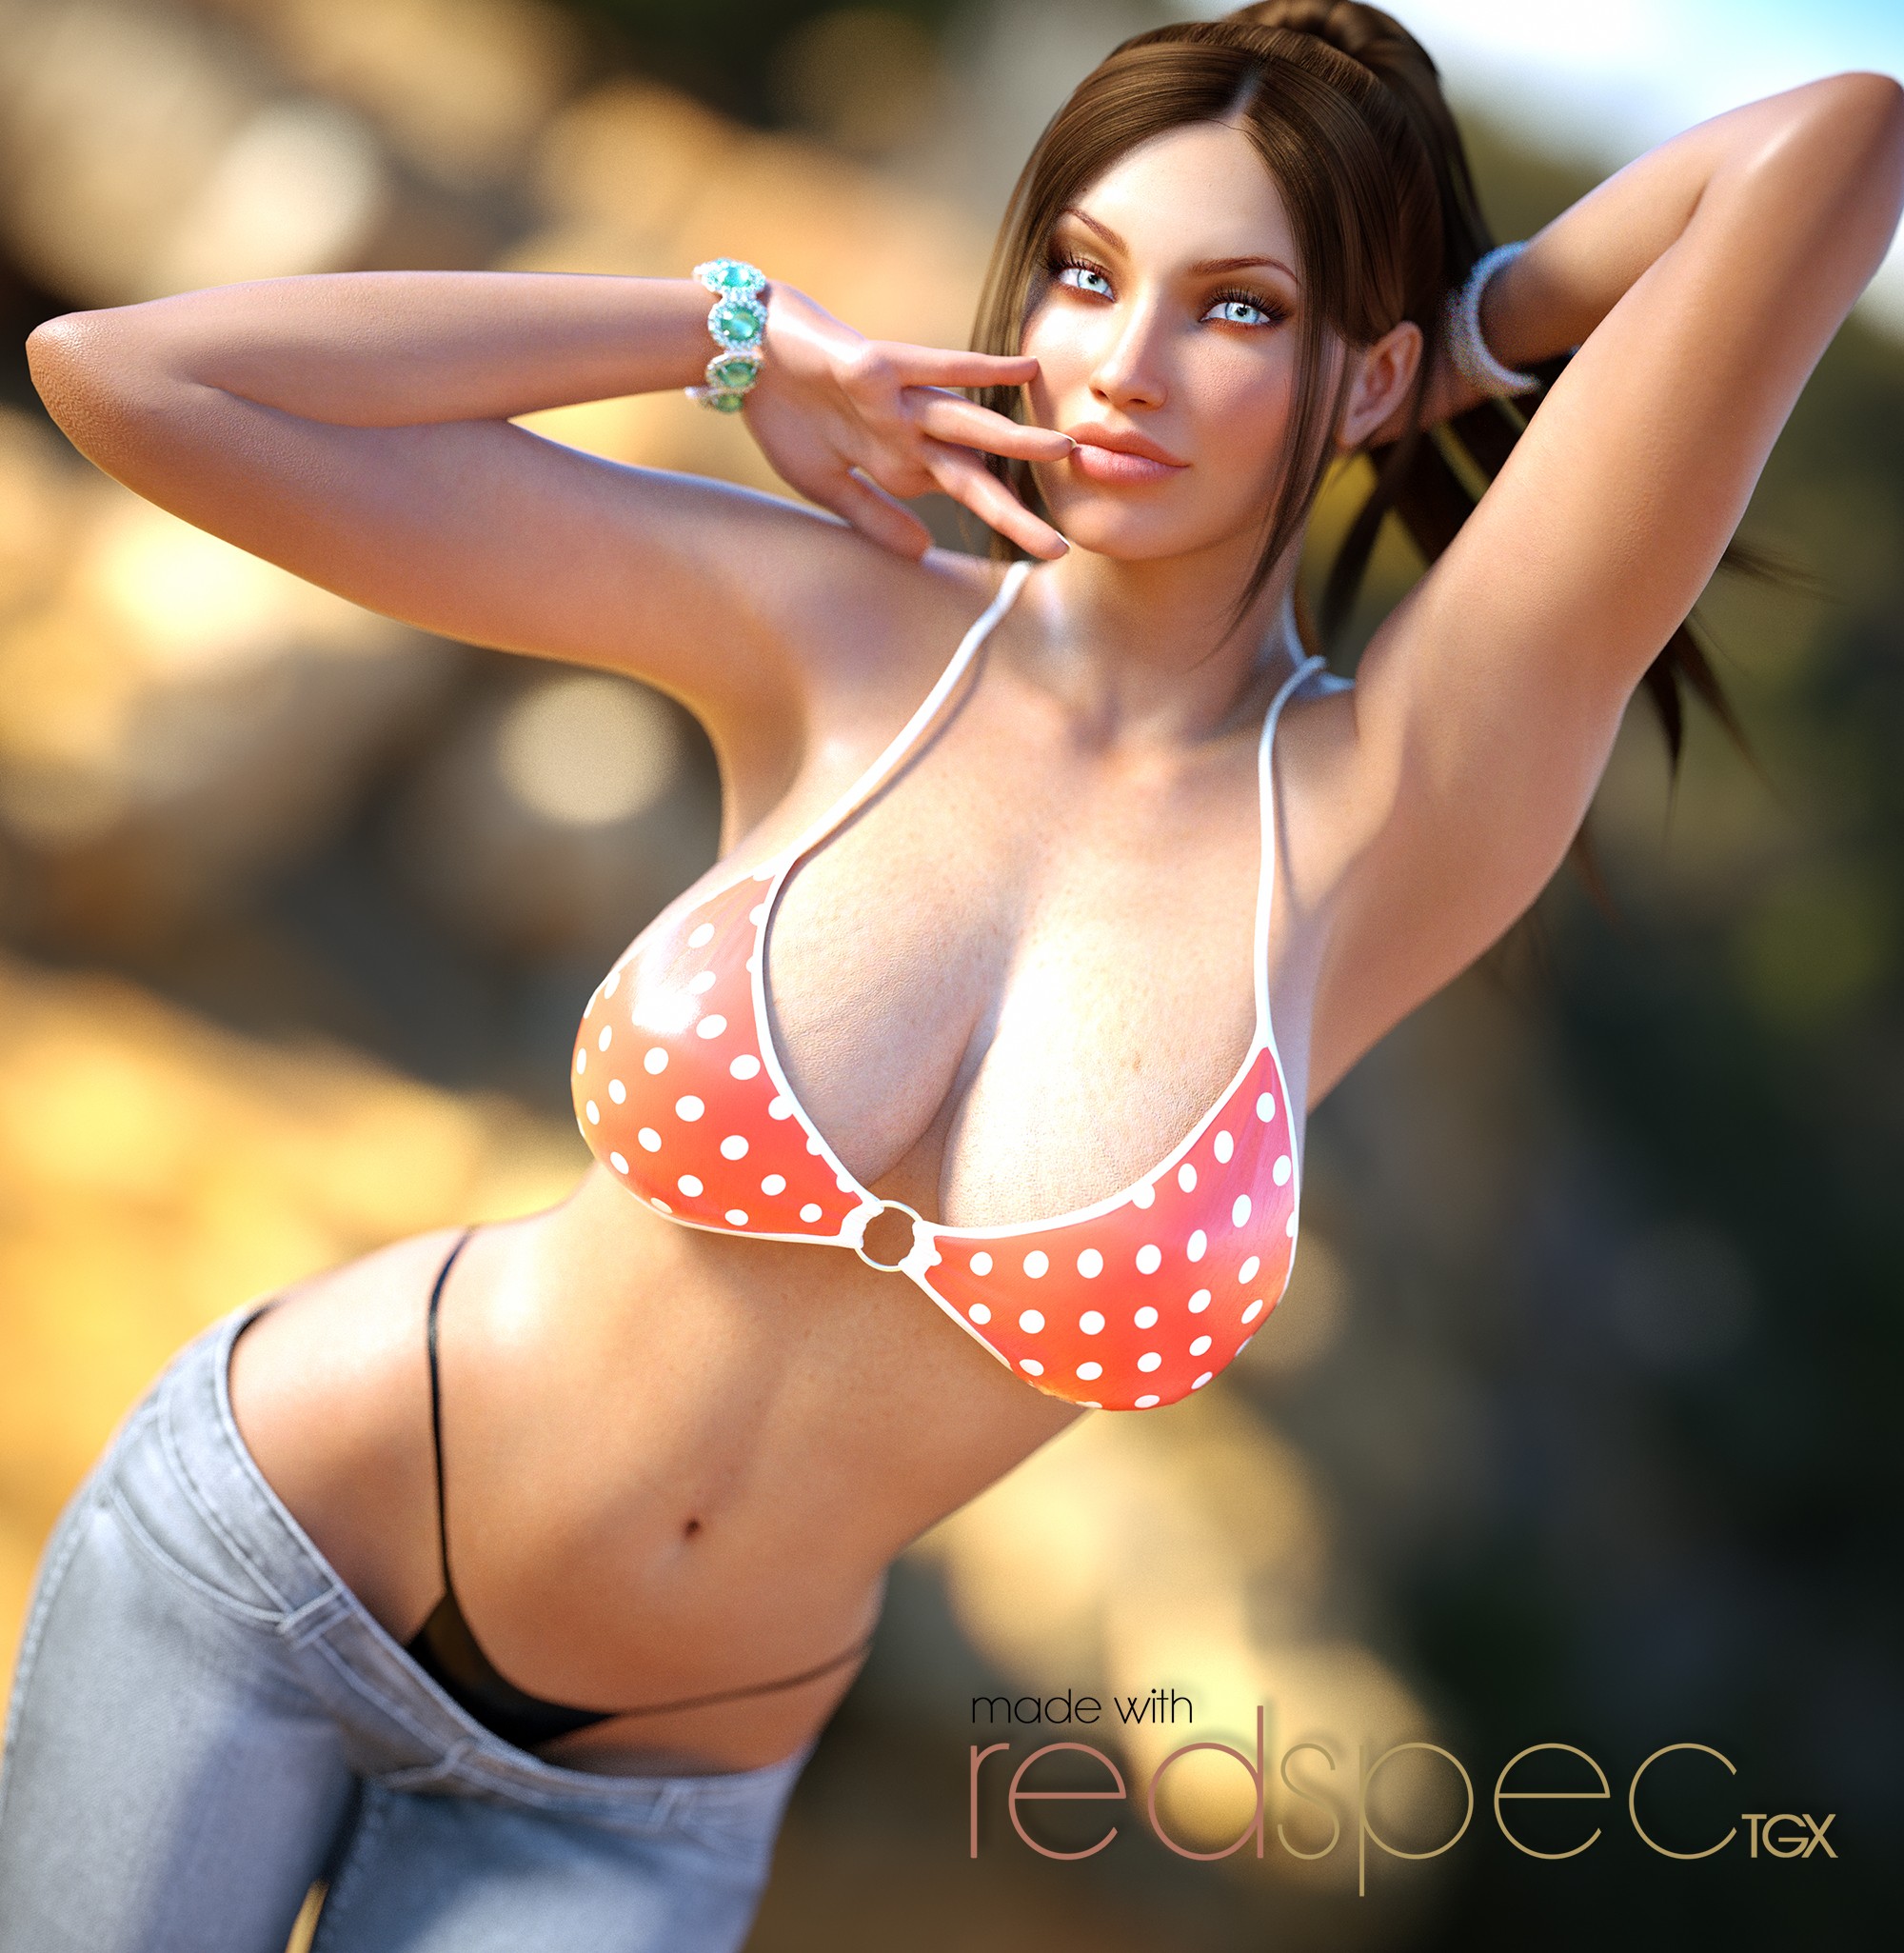 General 2000x2051 CGI boobs bikini jeans big boobs women brunette portrait display digital art text looking at viewer arms up watermarked closed mouth bracelets blurry background blurred long hair slim body thong cleavage